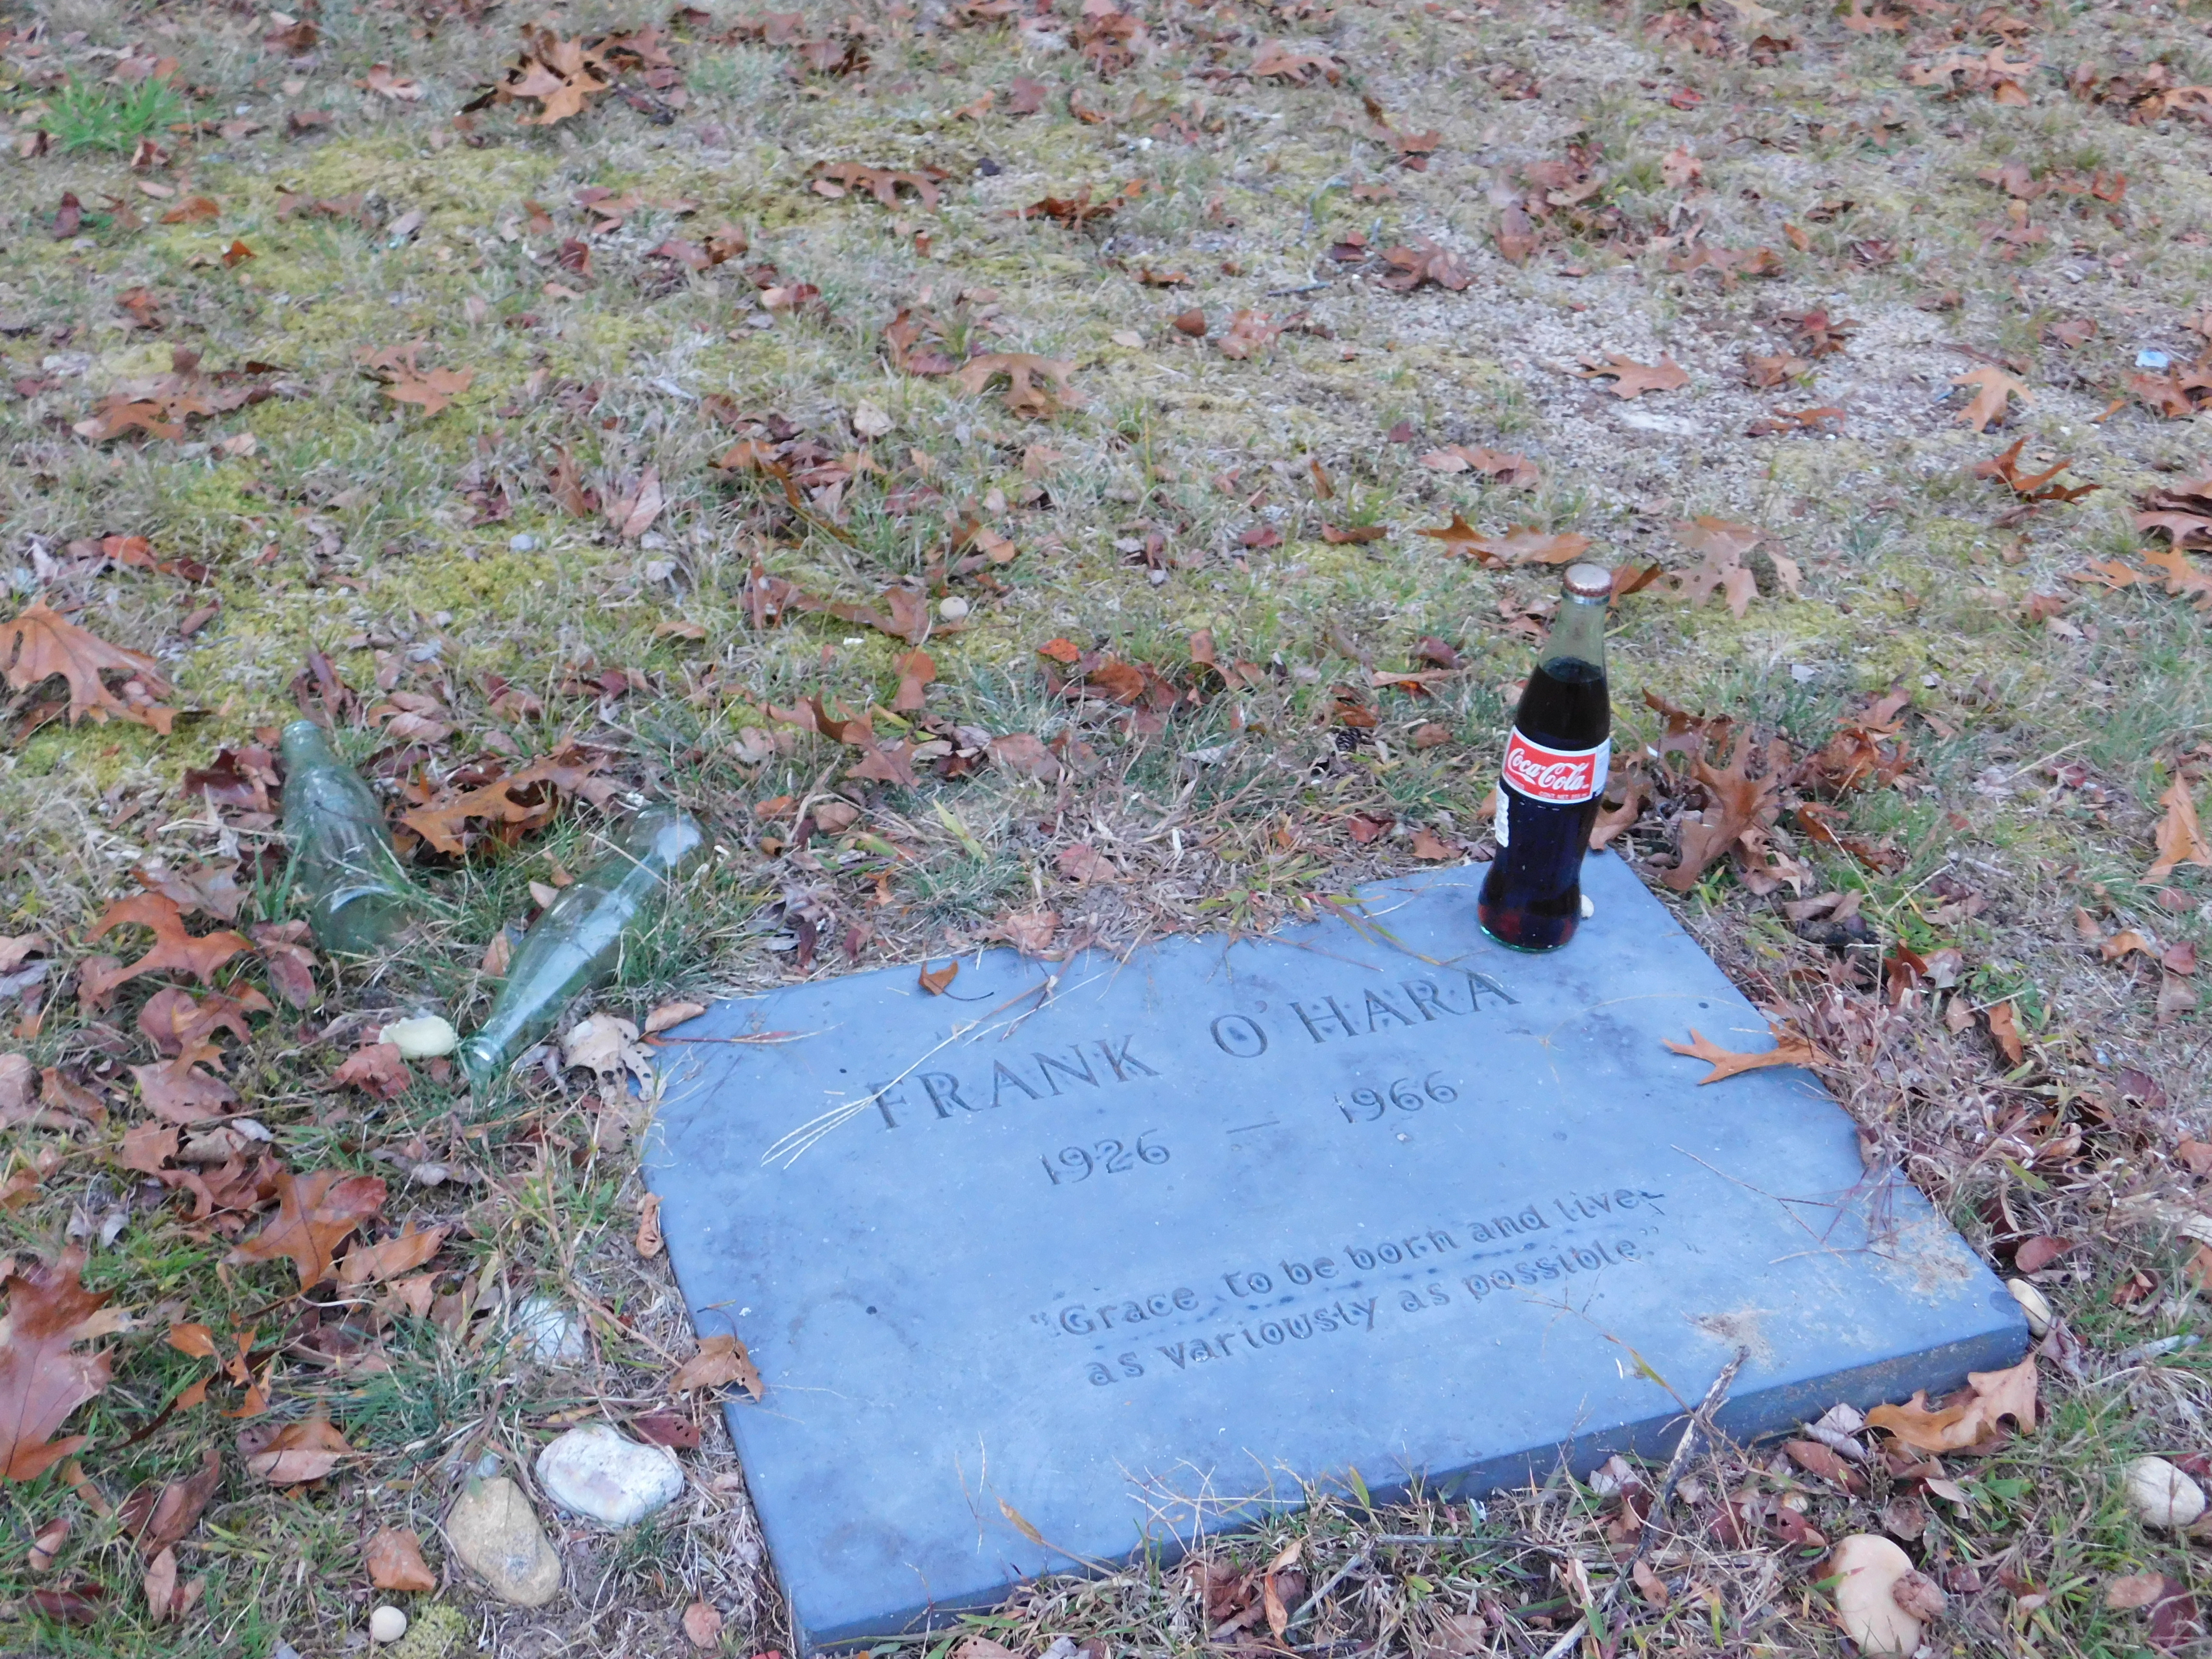 Frank O'Hara's grave sight. The famous poet has an unassuming gravestone, but he is a popular writer people often visit at Green River.   ELIZABETH VESPE